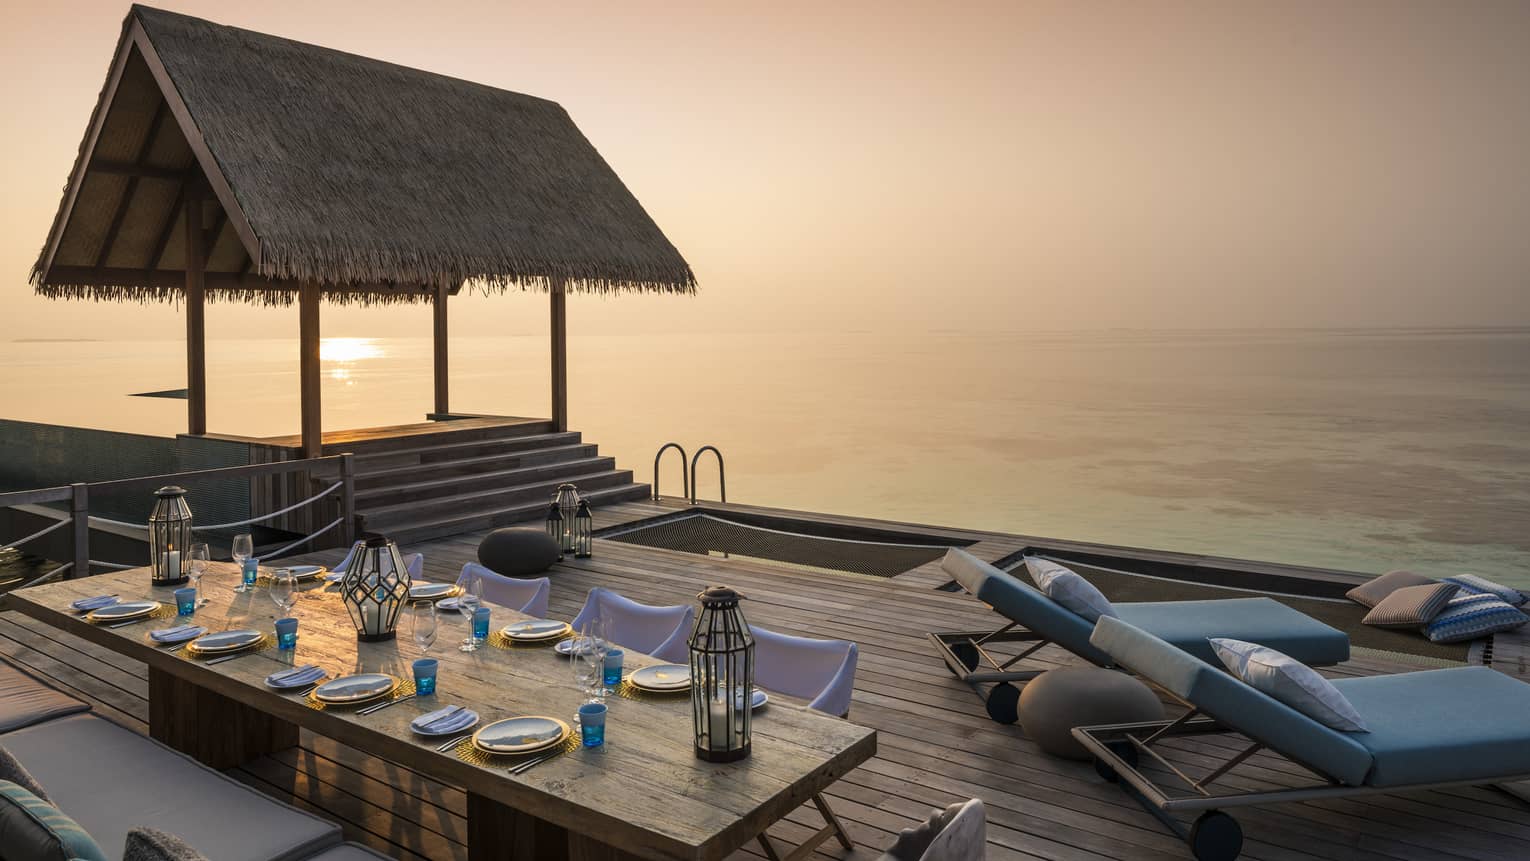 Two-Bedroom Water Villa thatched roof pavilion over long private dining table on deck at sunset